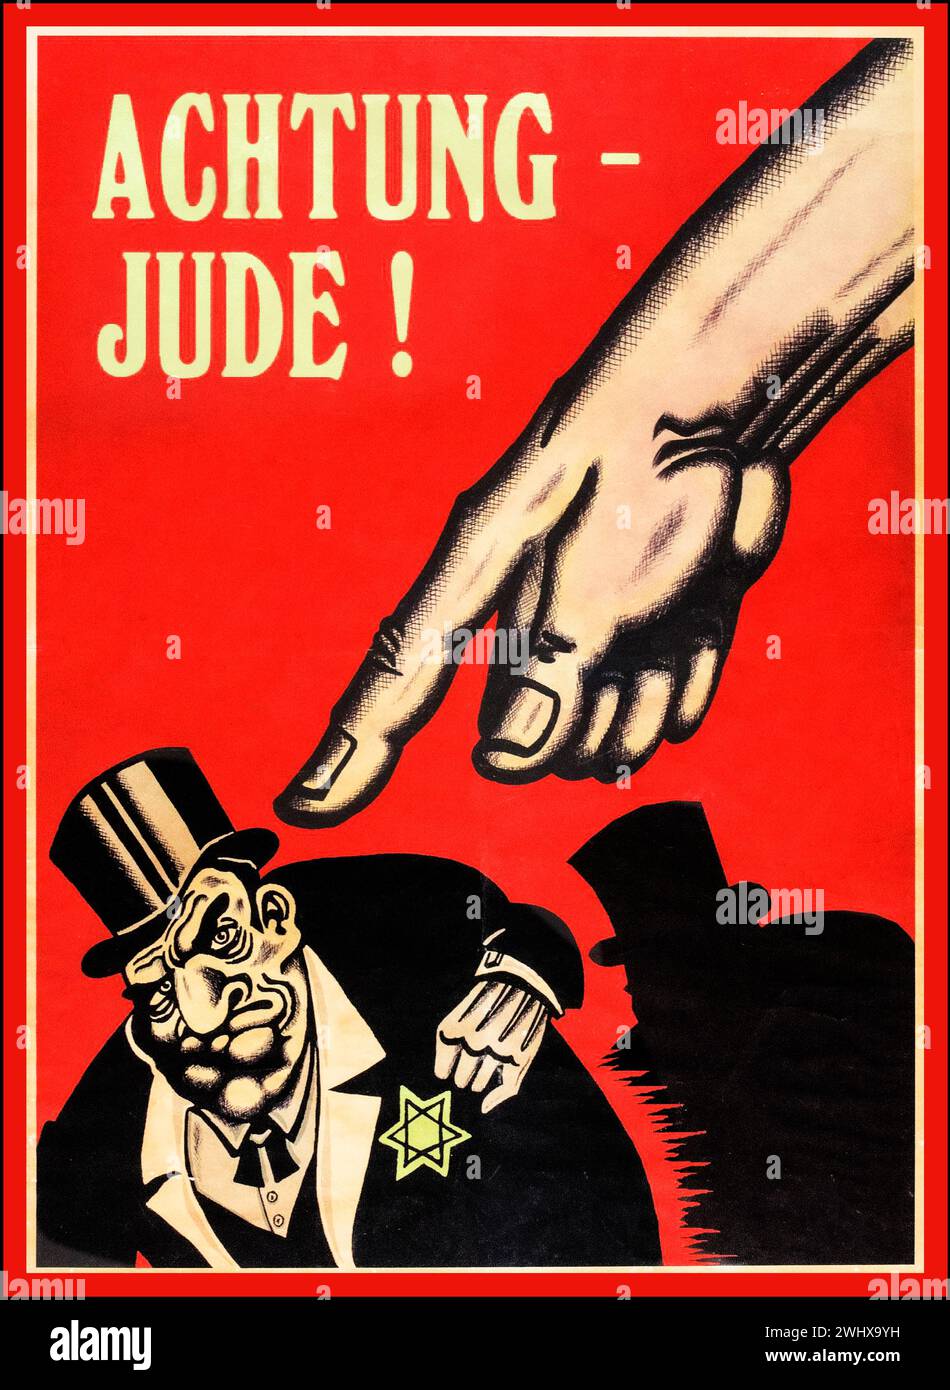 ACHTUNG JUDE WW2 1940s Anti-Semitic anti Jewish racist Nazi Germany Propaganda Nazi Party Third Reich poster, feautures a forceful hand pointing to a Jewish caricature man wearing a business suit and top hat with the 'Star of David' on his chest. The poster is titled :'ACHTUNG - JUDE!' ('ATTENTION - JEW!'). Stock Photo